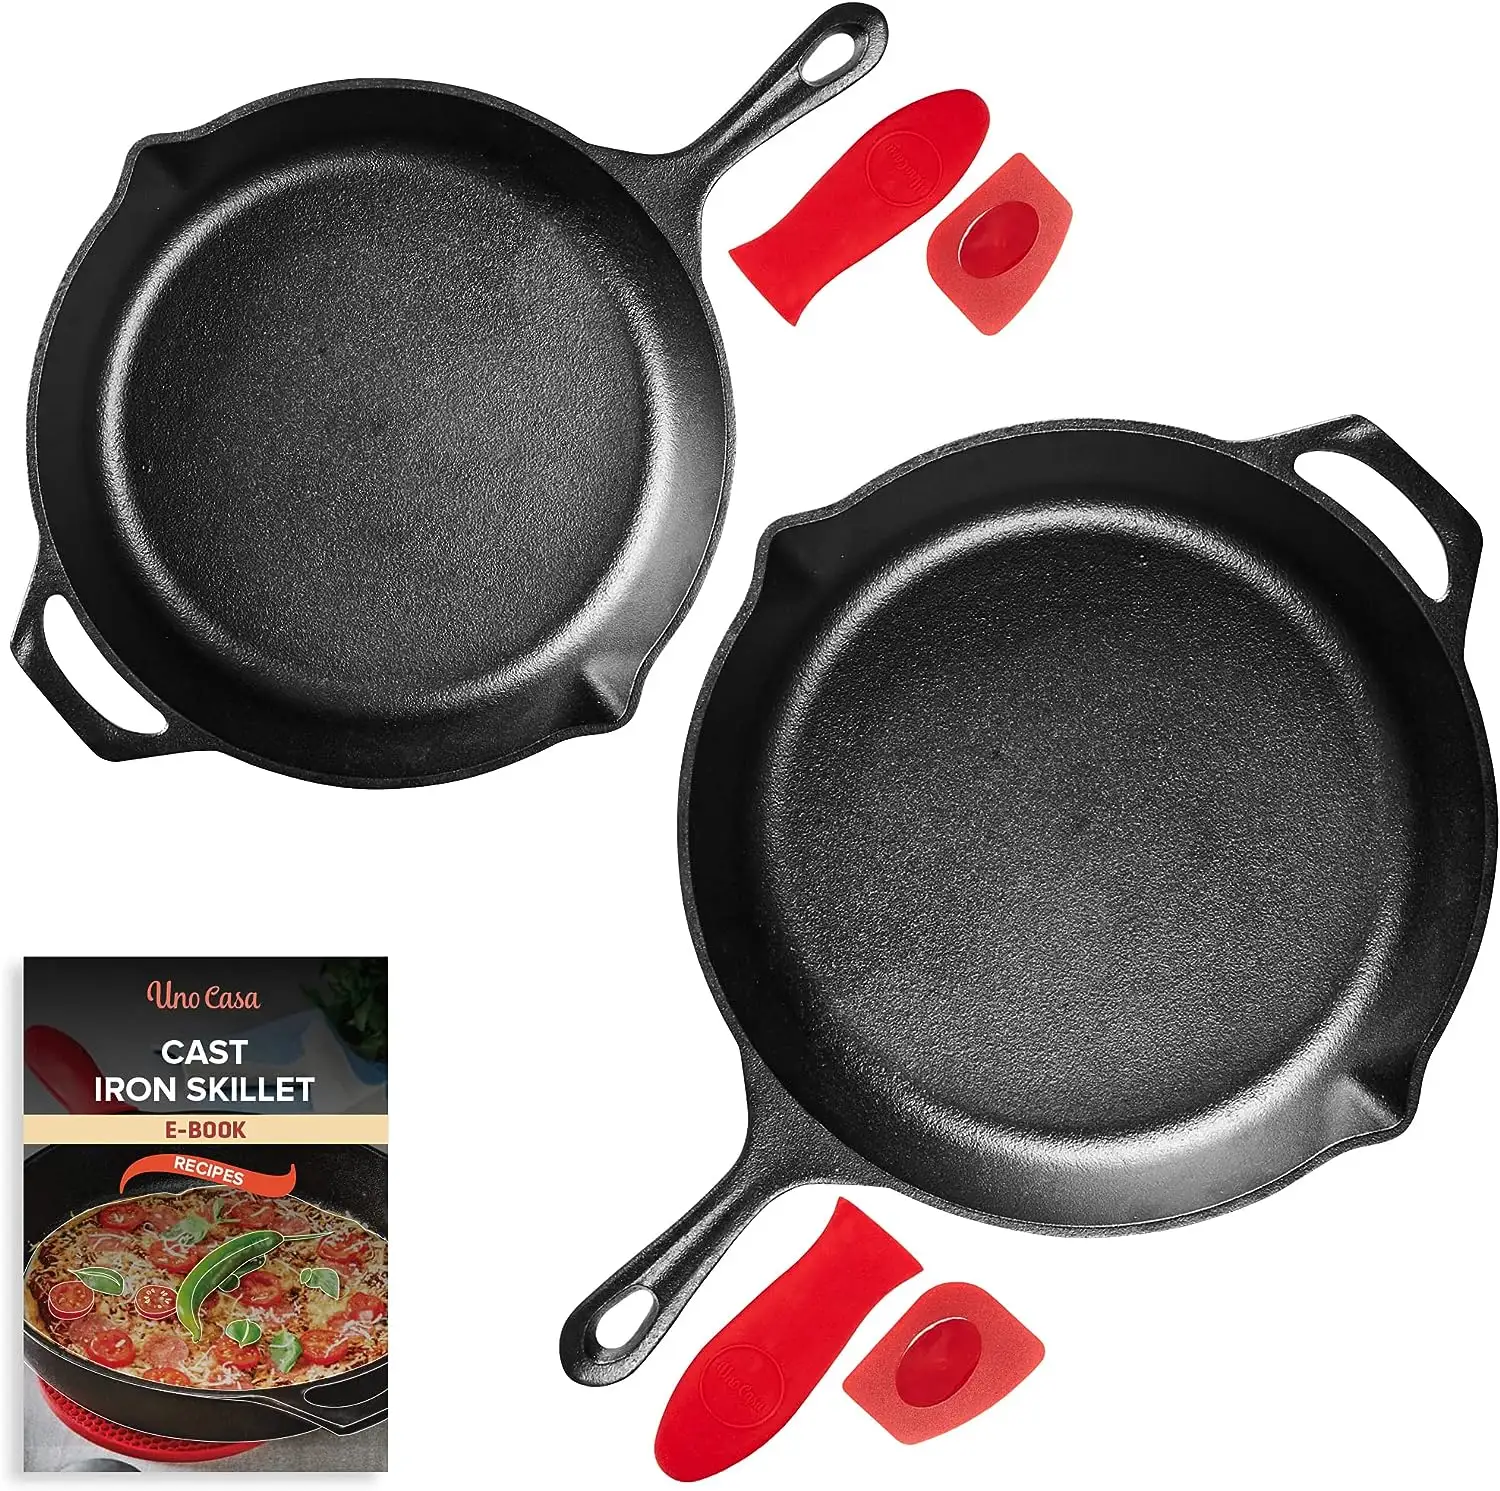 Cast Iron Frying Pans Set of 2 25 cm and 30 cm Frying Pans for Cakes, Pizza, Sauce, Bread, Eggs